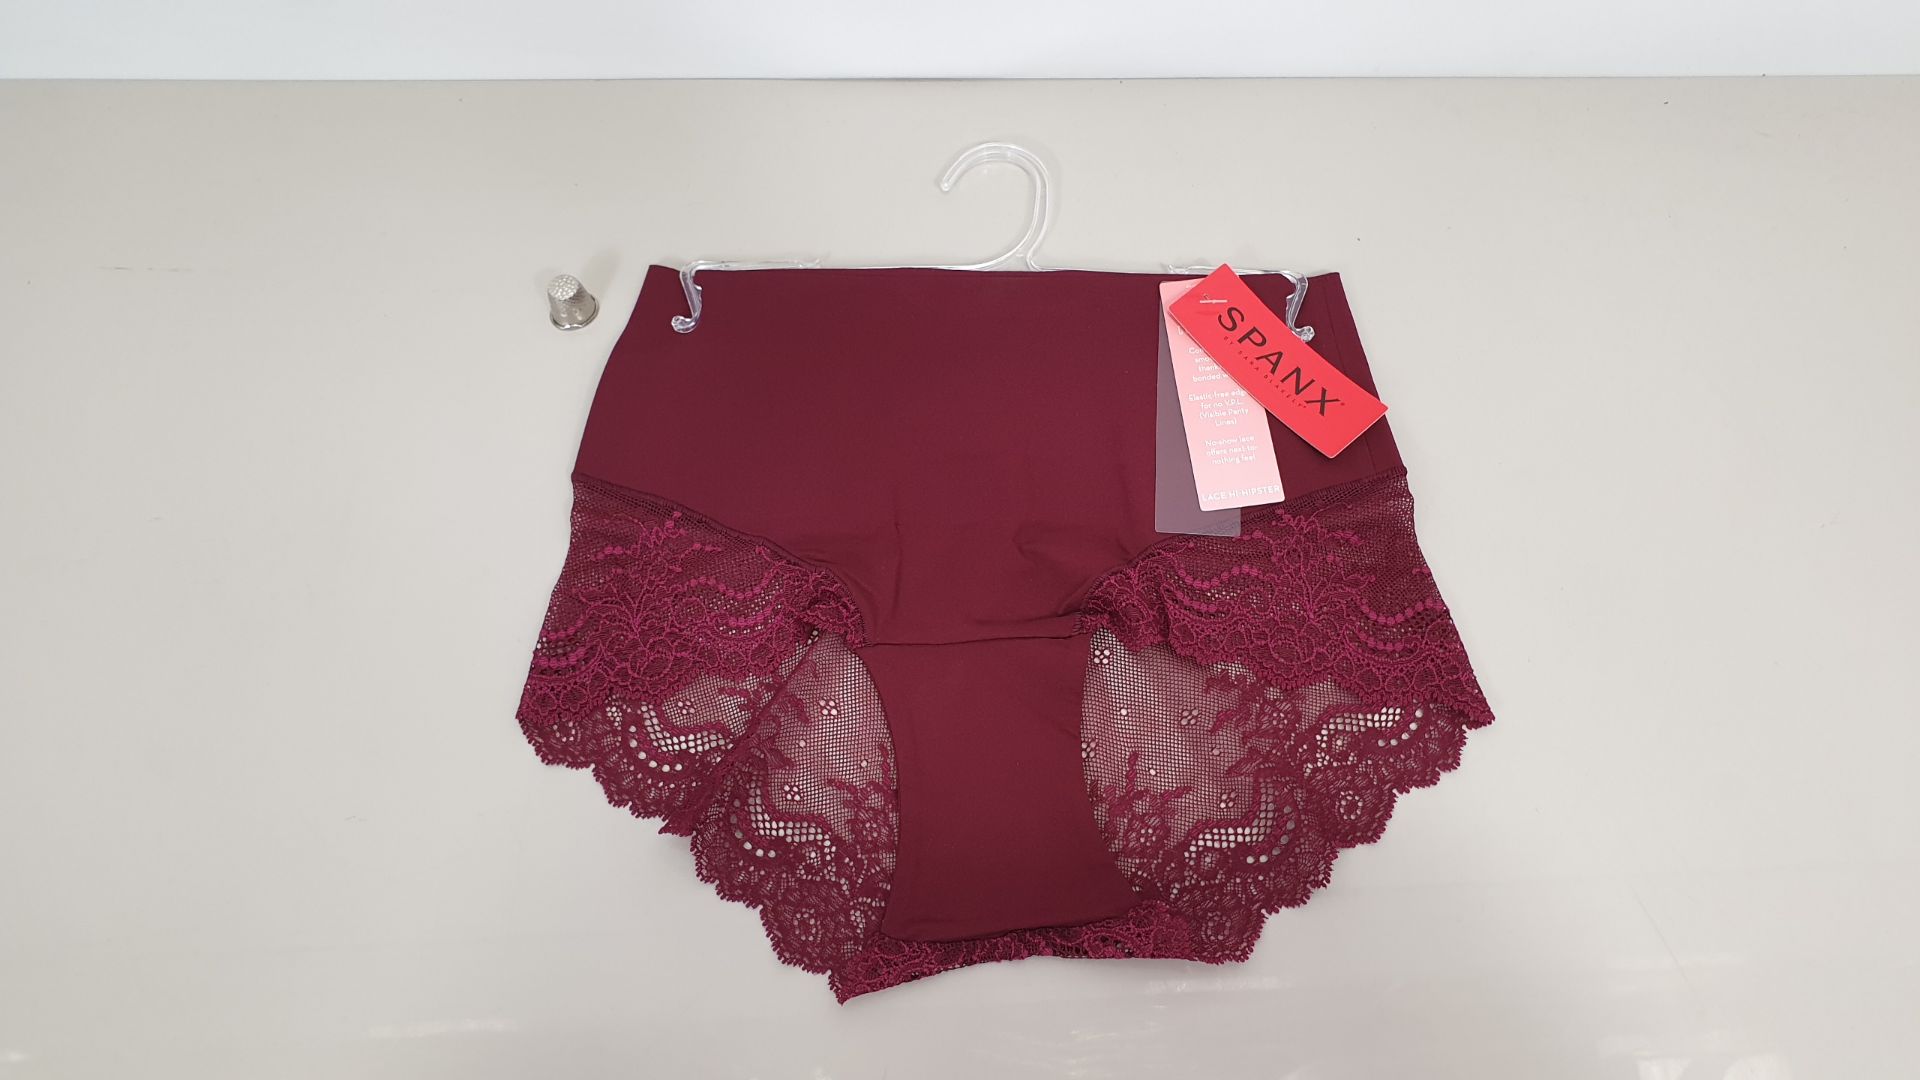 6 X BRAND NEW SPANX LACE HI-HIPSTER WOMENS PANTIES IN RICH GARNET IN SIZES UK LARGE